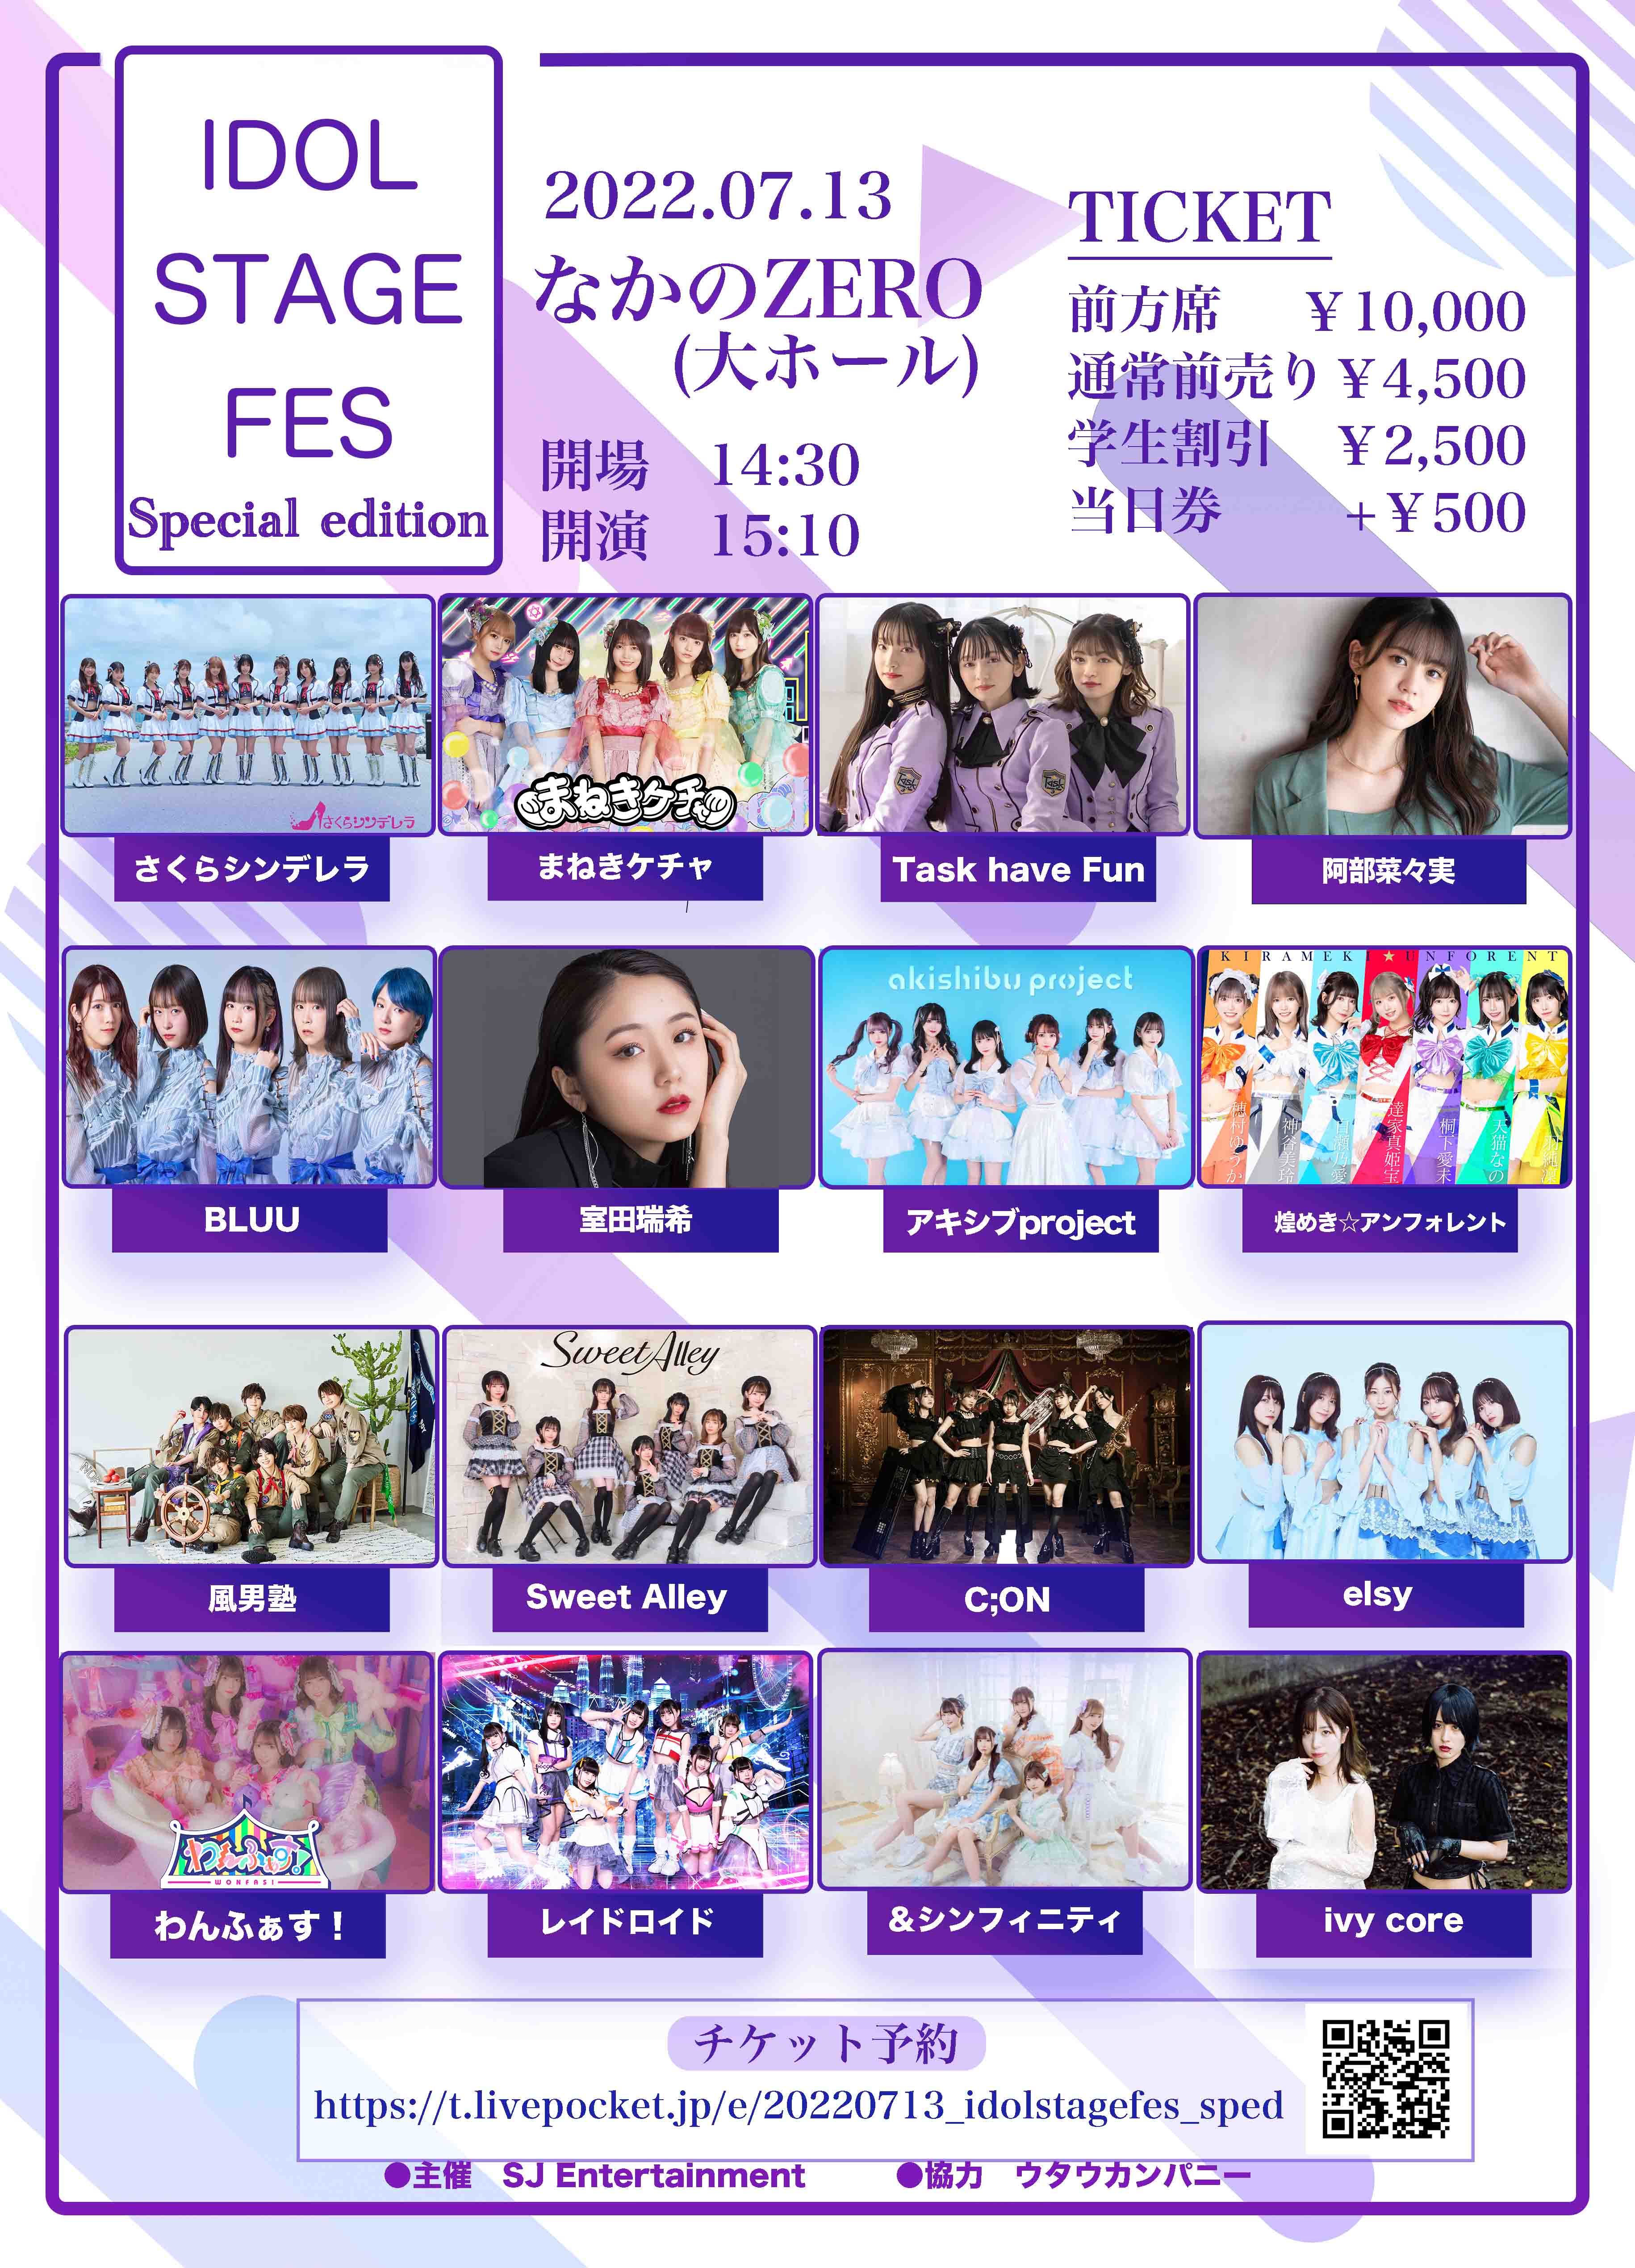 「IDOL STAGE FES. special edition 」